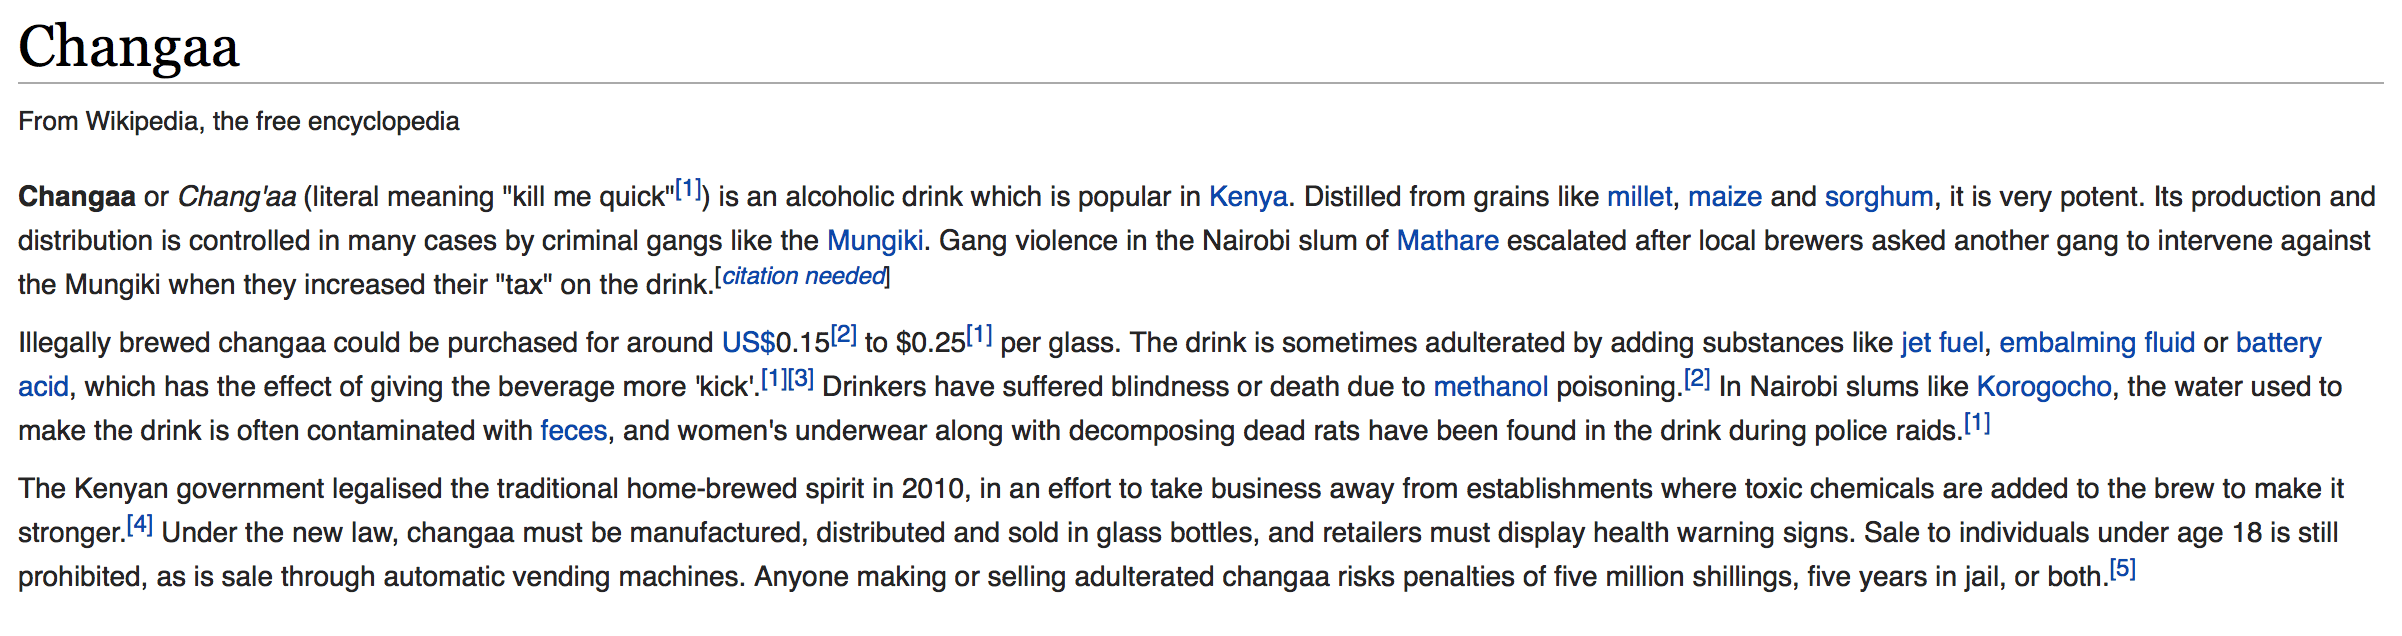 Changaa, highly potent alcohol from Kenya